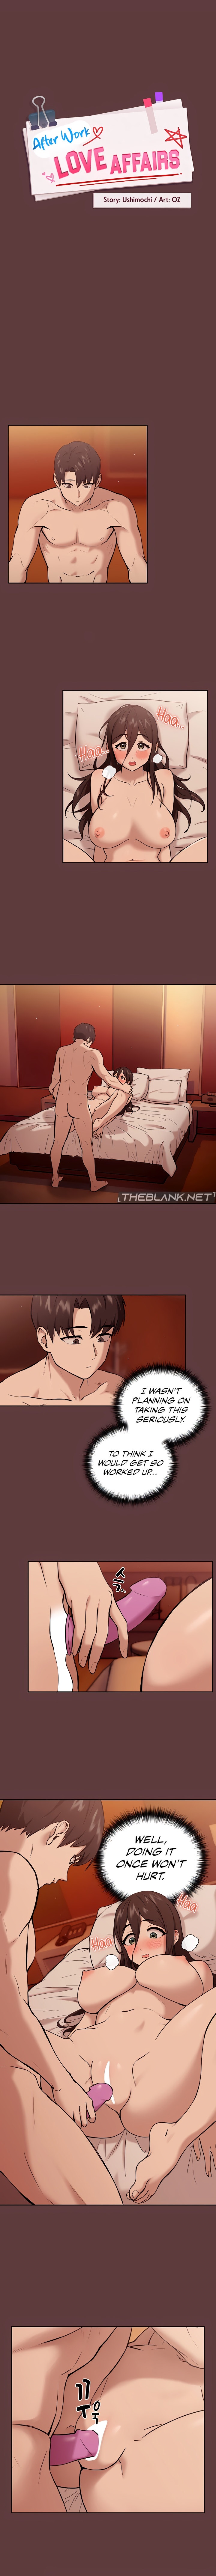 After Work Love Affairs - Chapter 6 Page 1